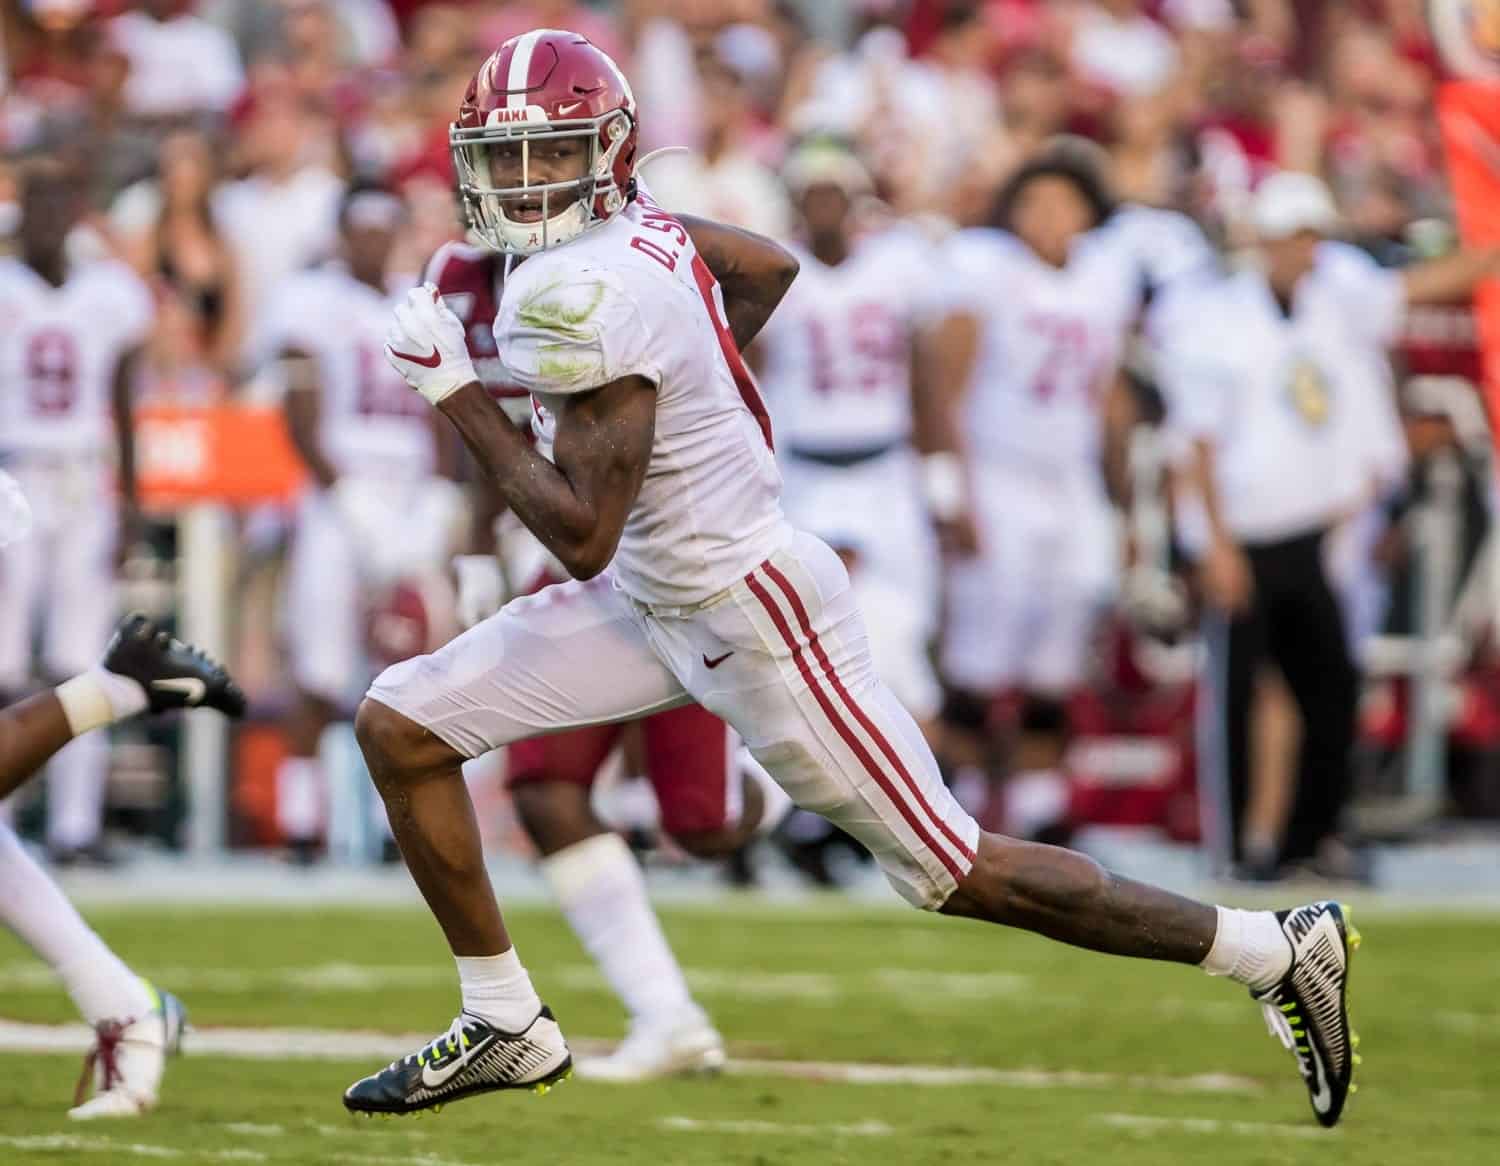 Saturday scouting report - Devonta Smith (WR, Alabama) - Games to watch  this Saturday - Big Blue View